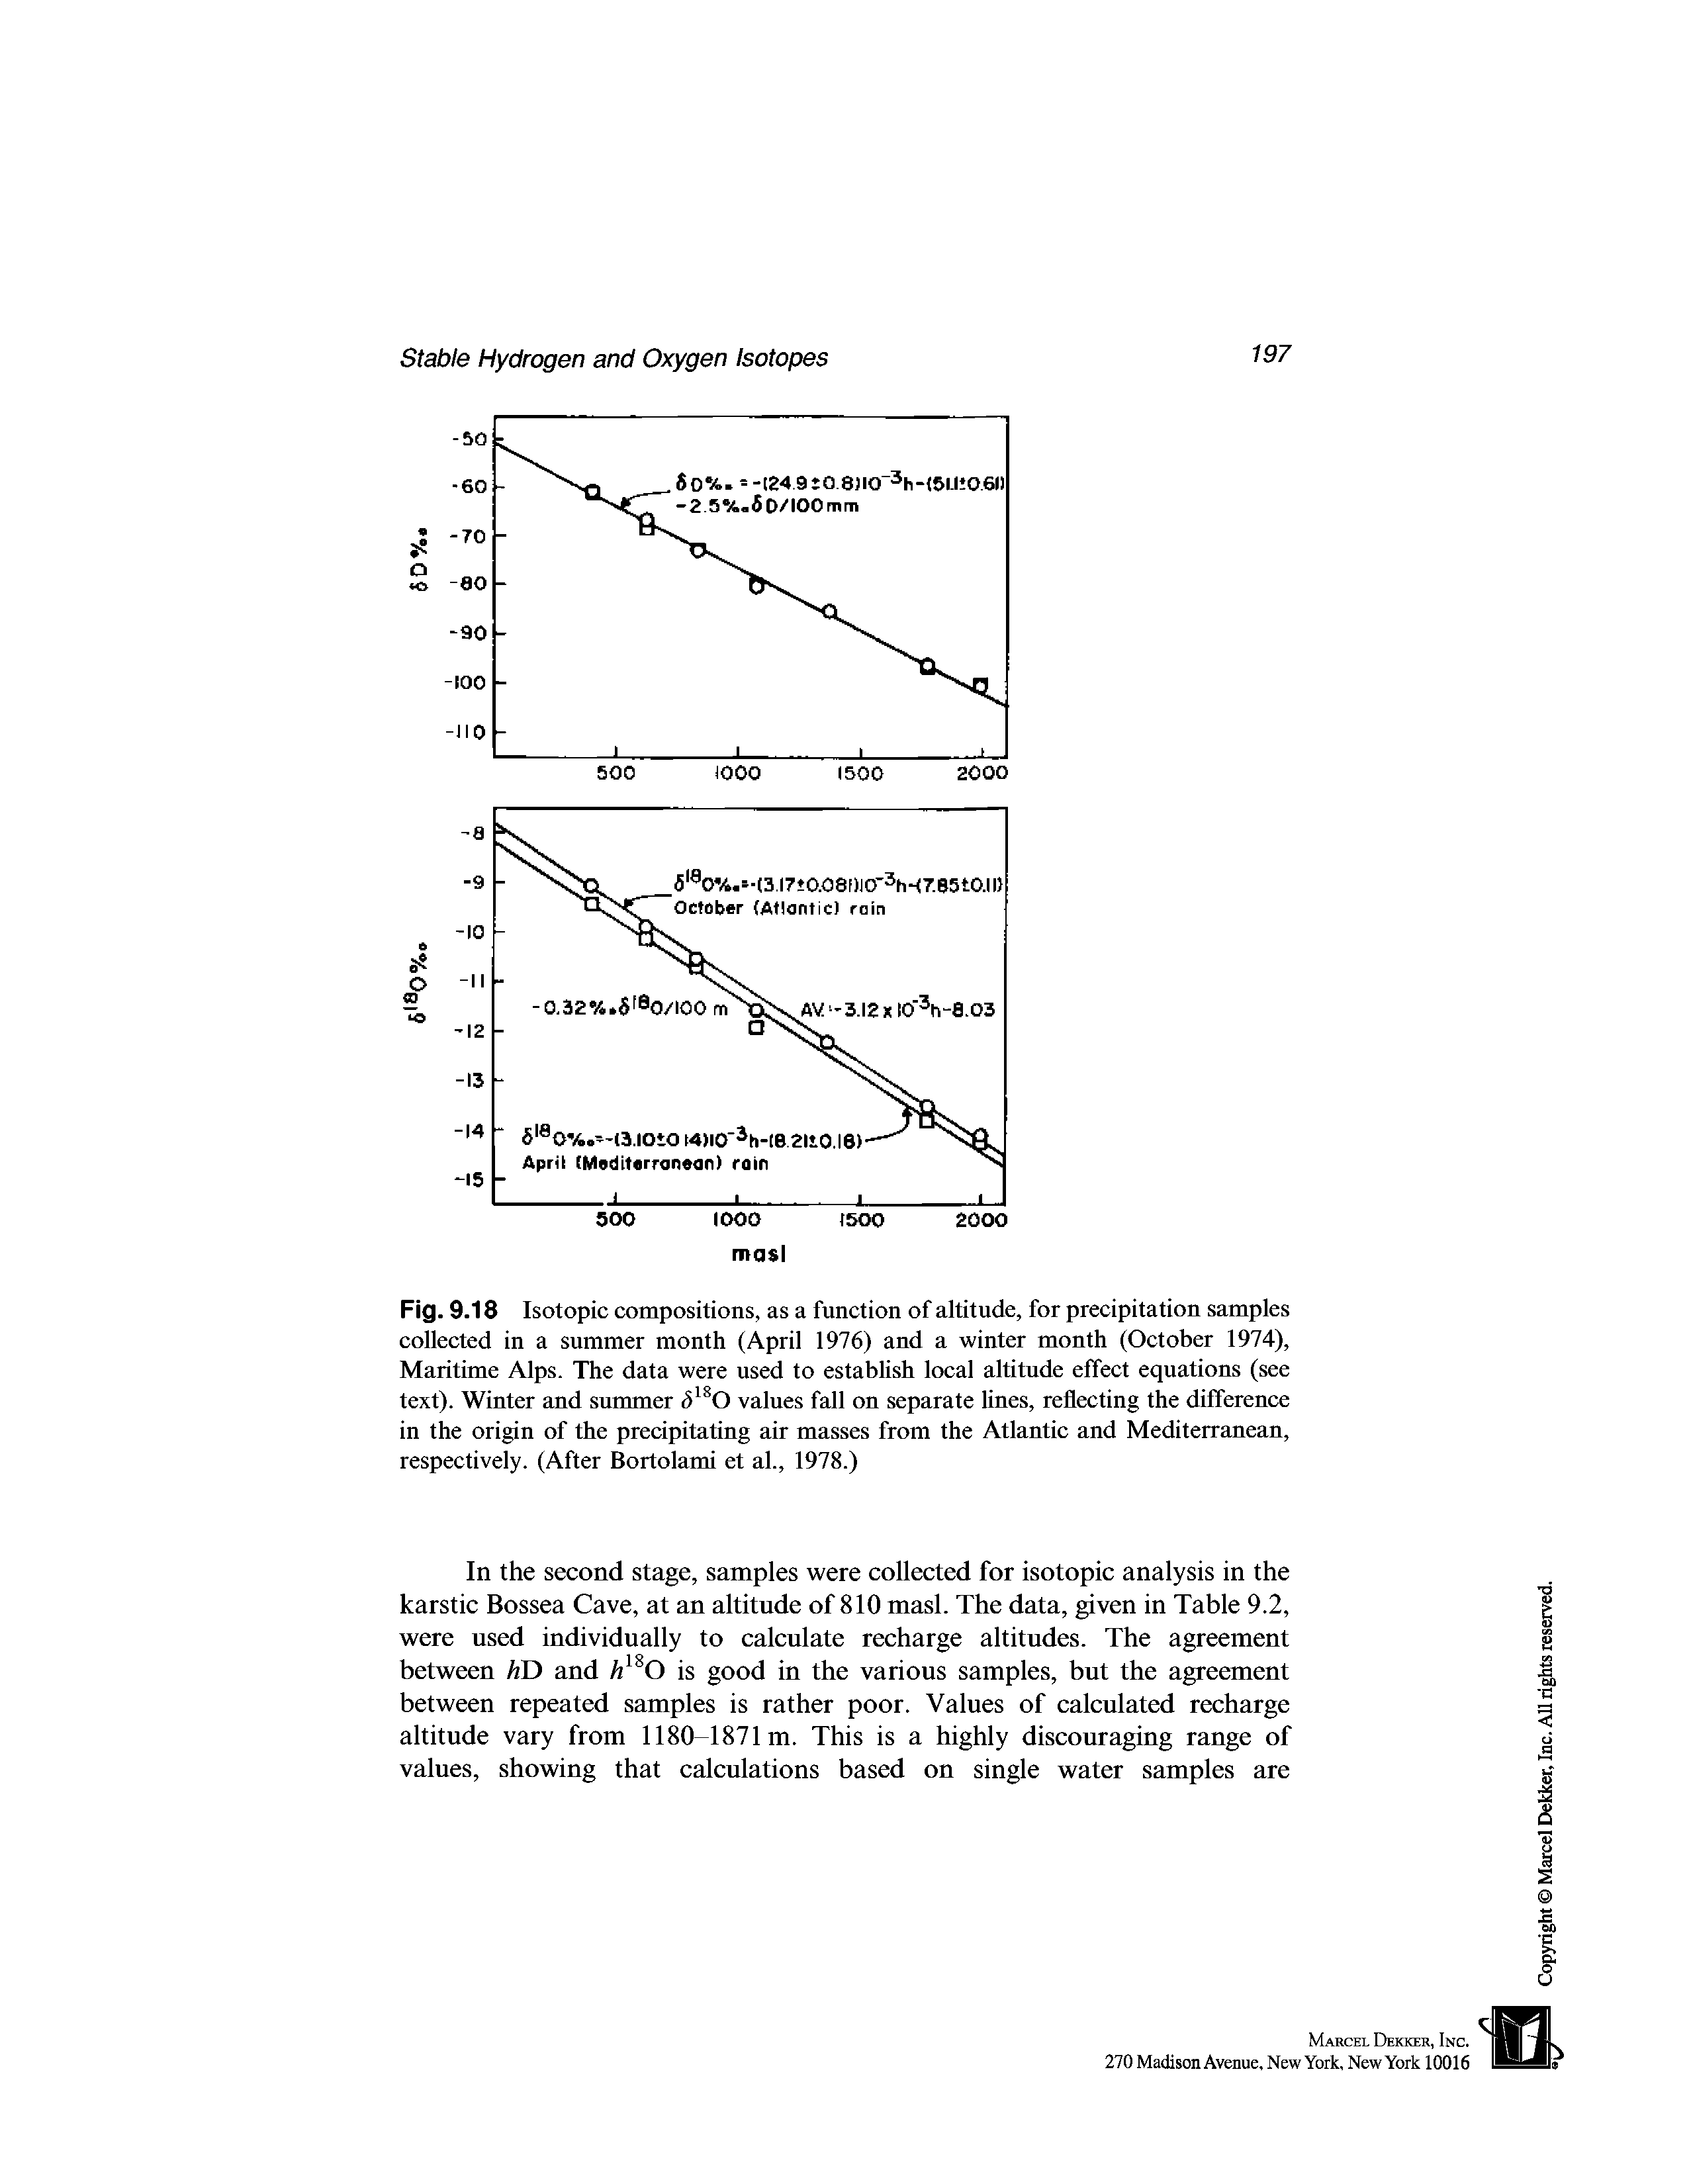 Fig. 9.18 Isotopic compositions, as a function of altitude, for precipitation samples collected in a summer month (April 1976) and a winter month (October 1974), Maritime Alps. The data were used to establish local altitude effect equations (see text). Winter and summer <5lsO values fall on separate lines, reflecting the difference in the origin of the precipitating air masses from the Atlantic and Mediterranean, respectively. (After Bortolami et al., 1978.)...